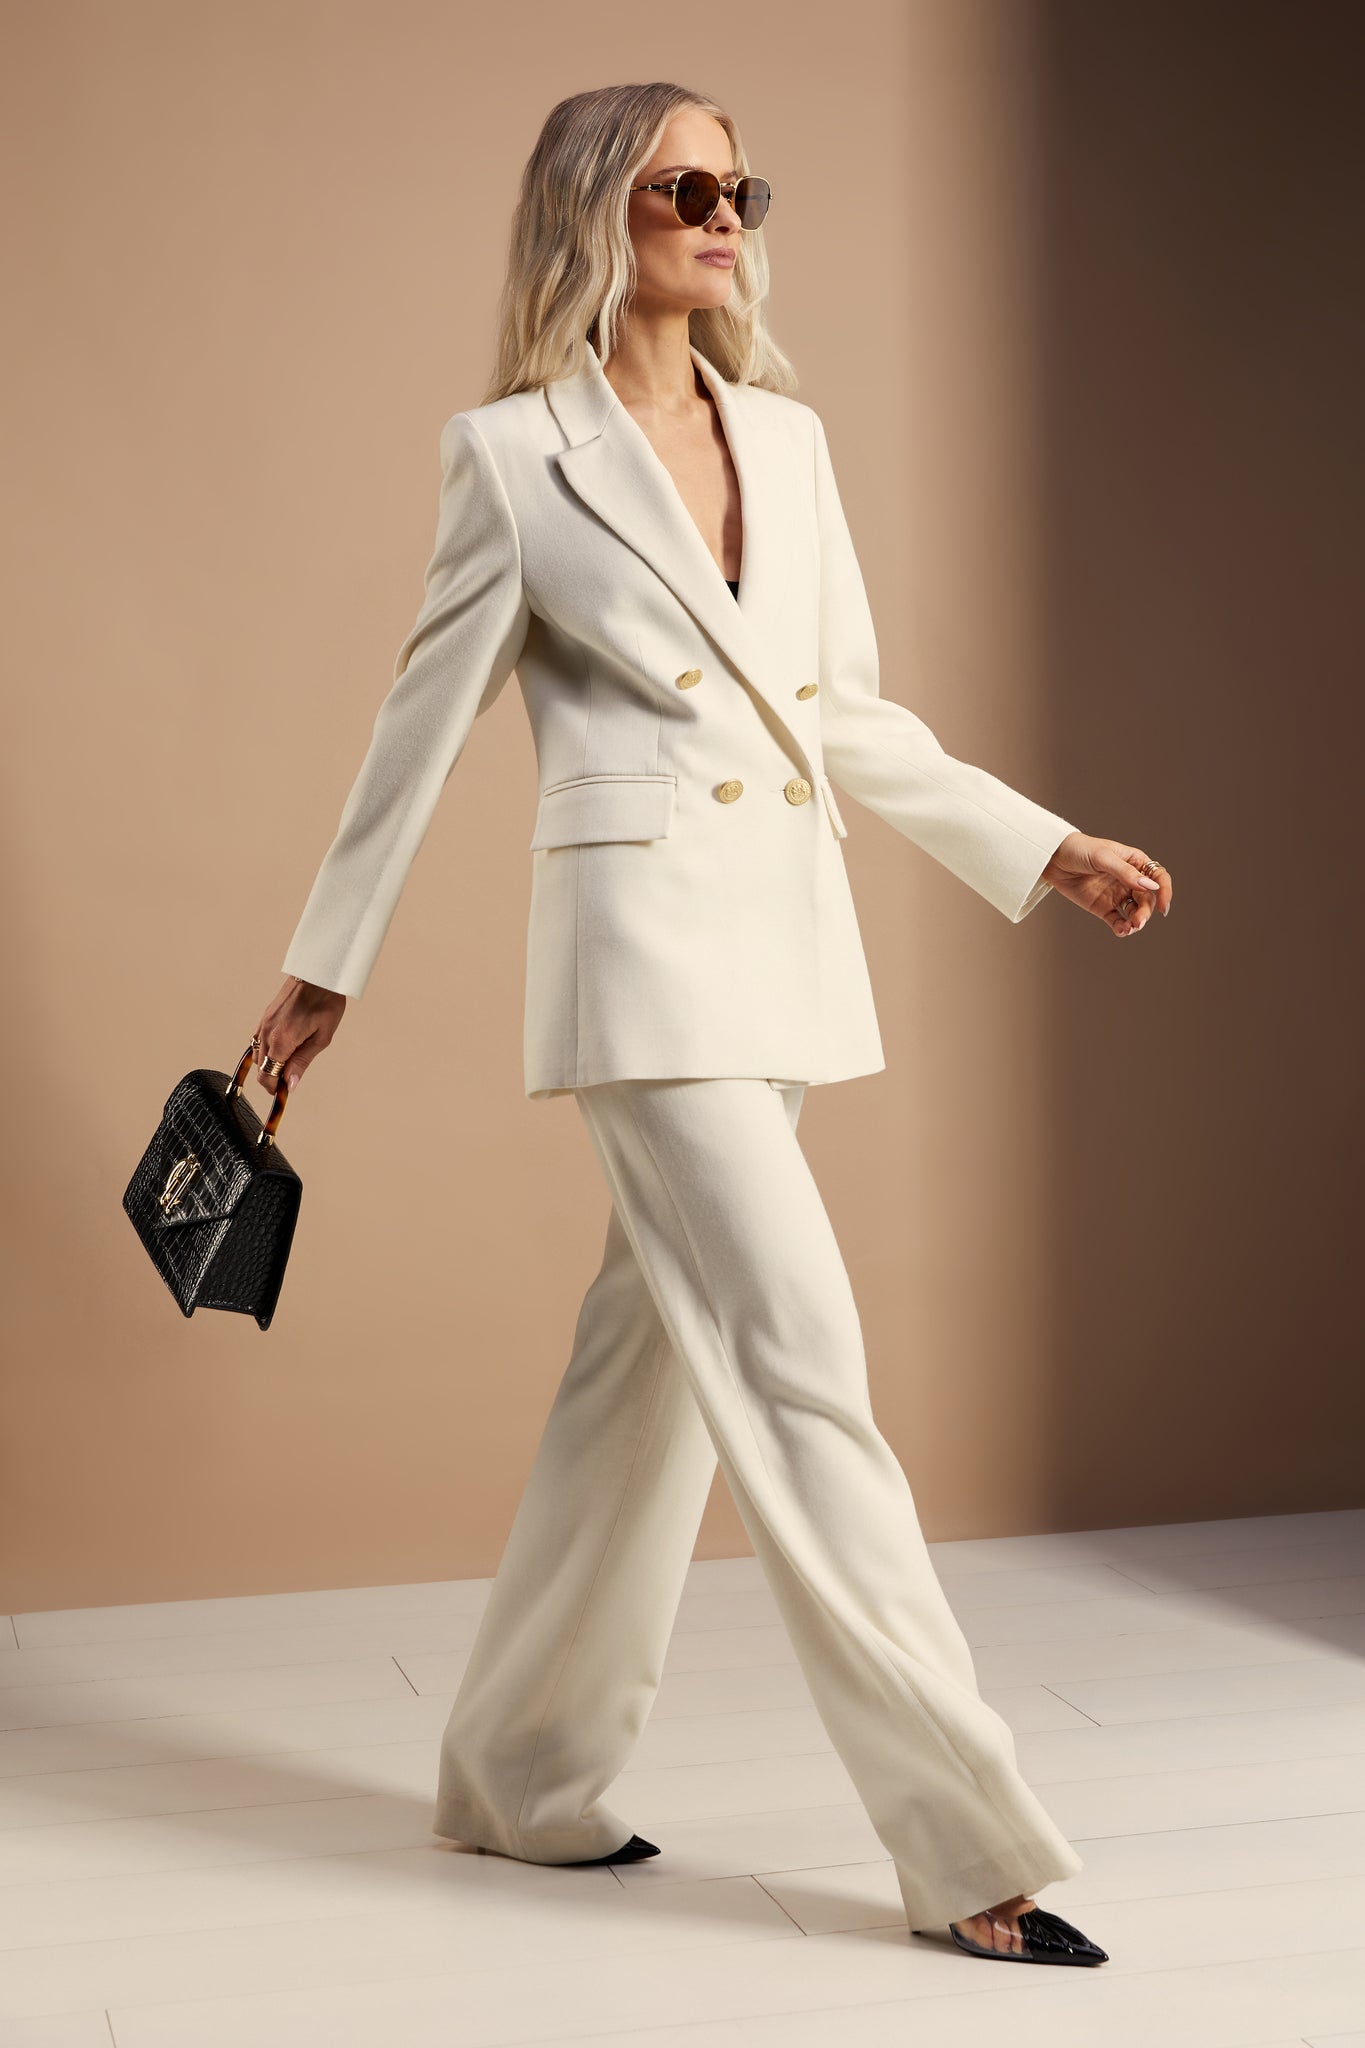 longline double breasted wool blazer in ivory tailor made in britain with relaxed fit welt pockets and gold buttons on the front and cuffs worn with tailored trousers in the same colour 